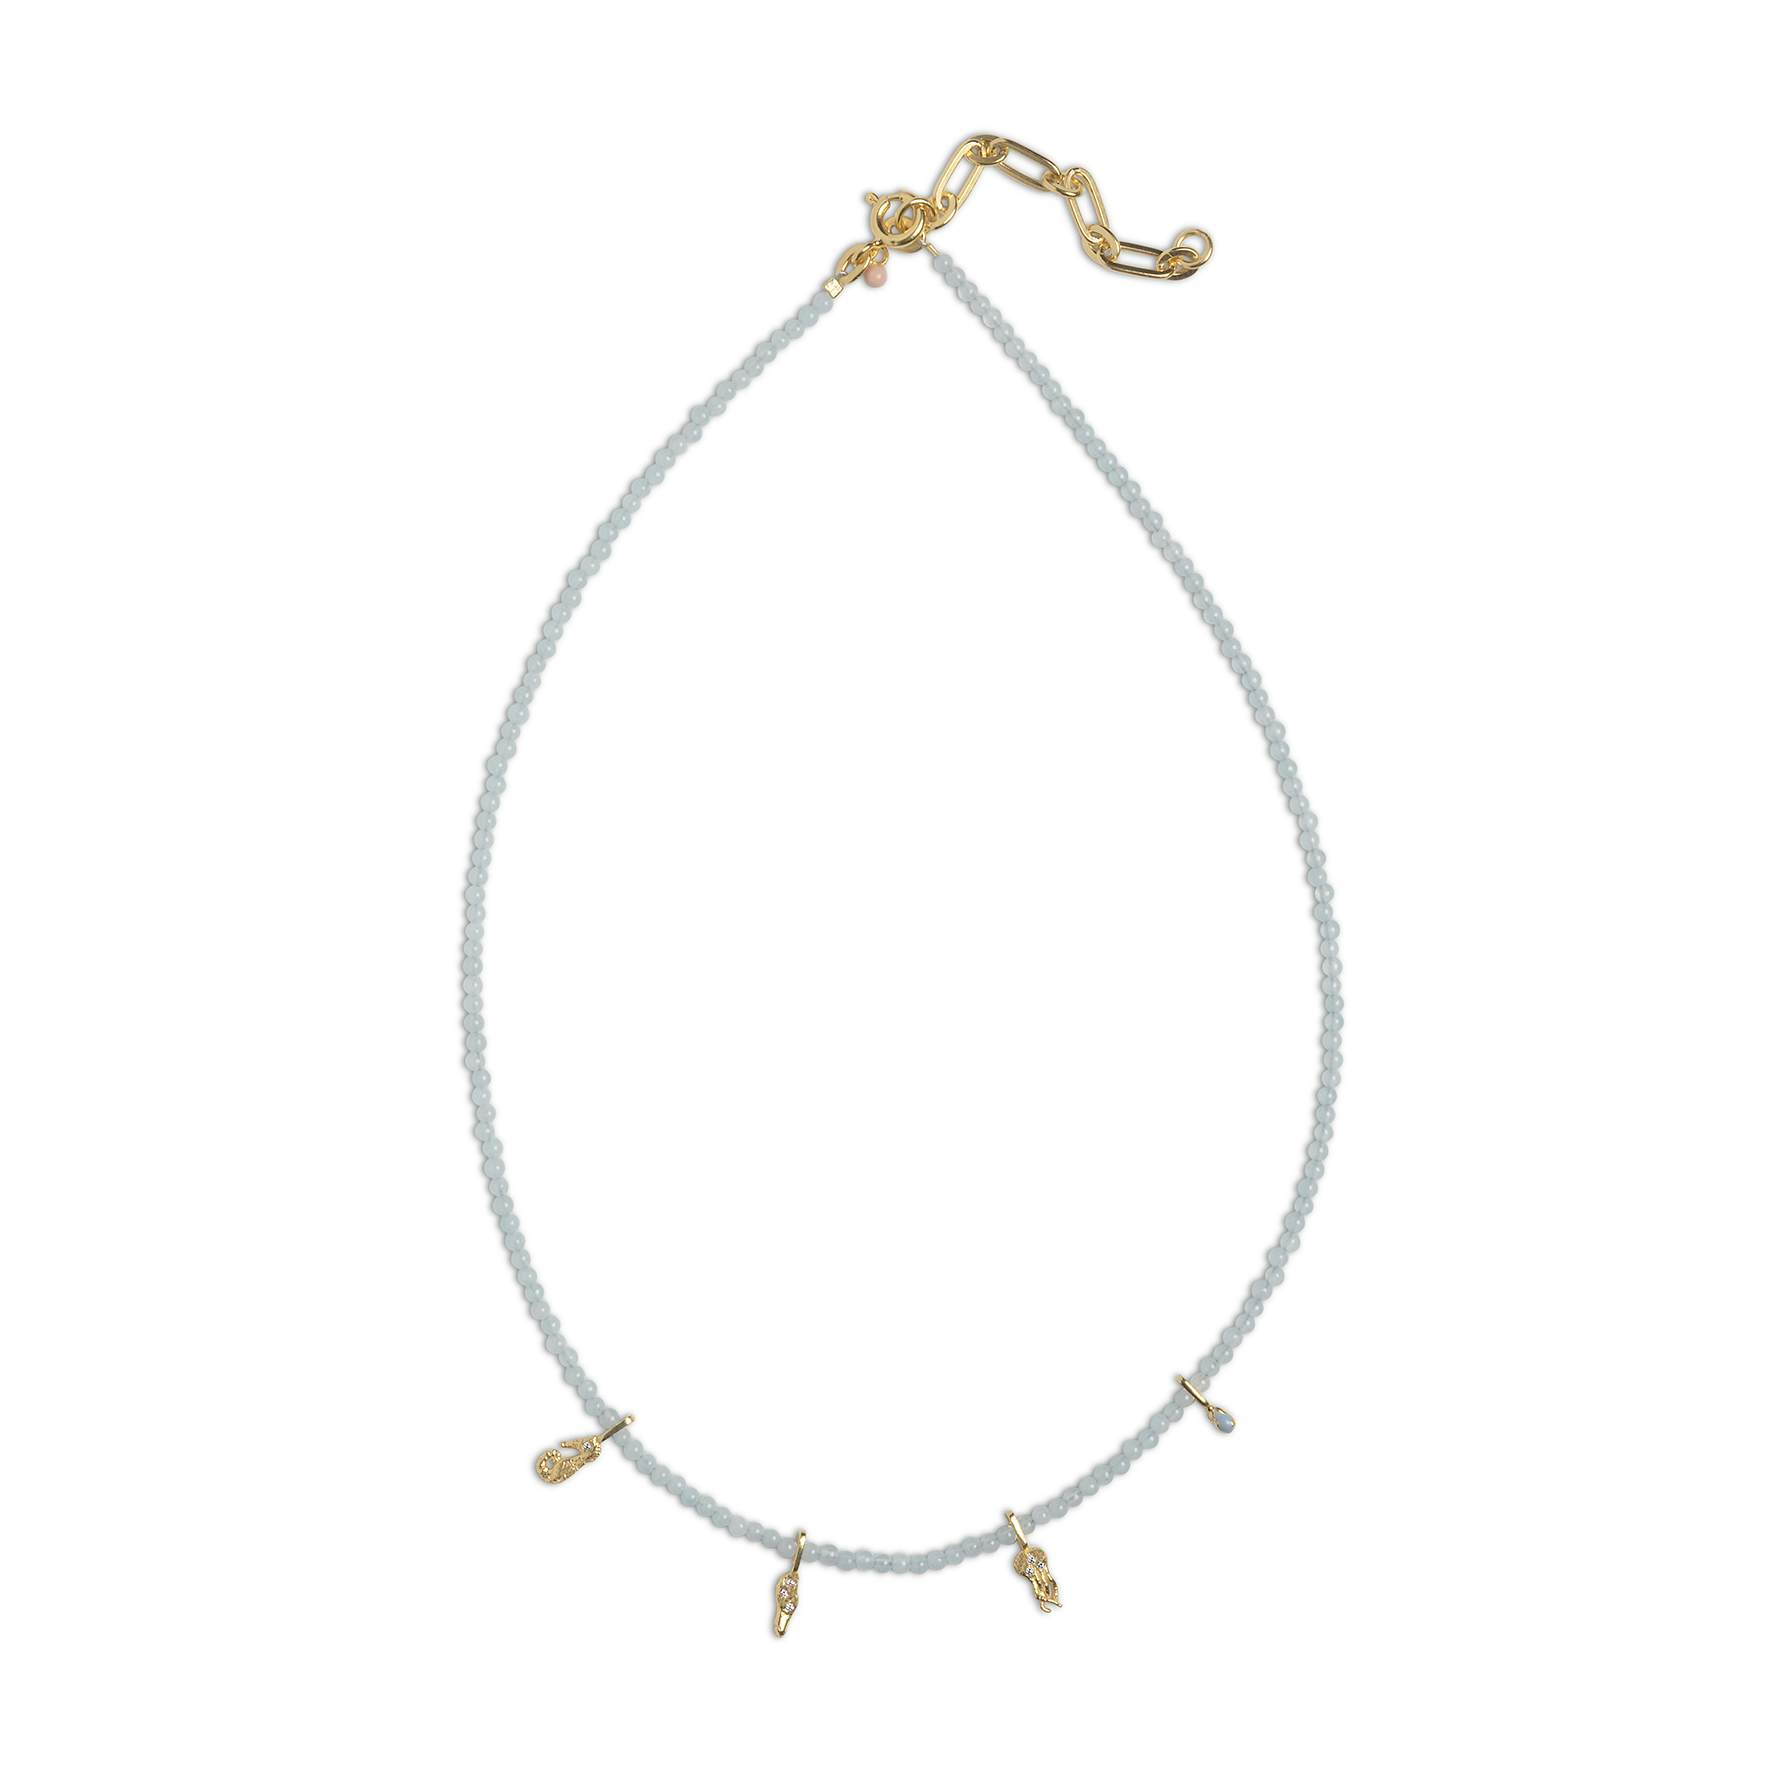 Bahama Necklace Aquamarine from Enamel Copenhagen in Goldplated-Silver Sterling 925